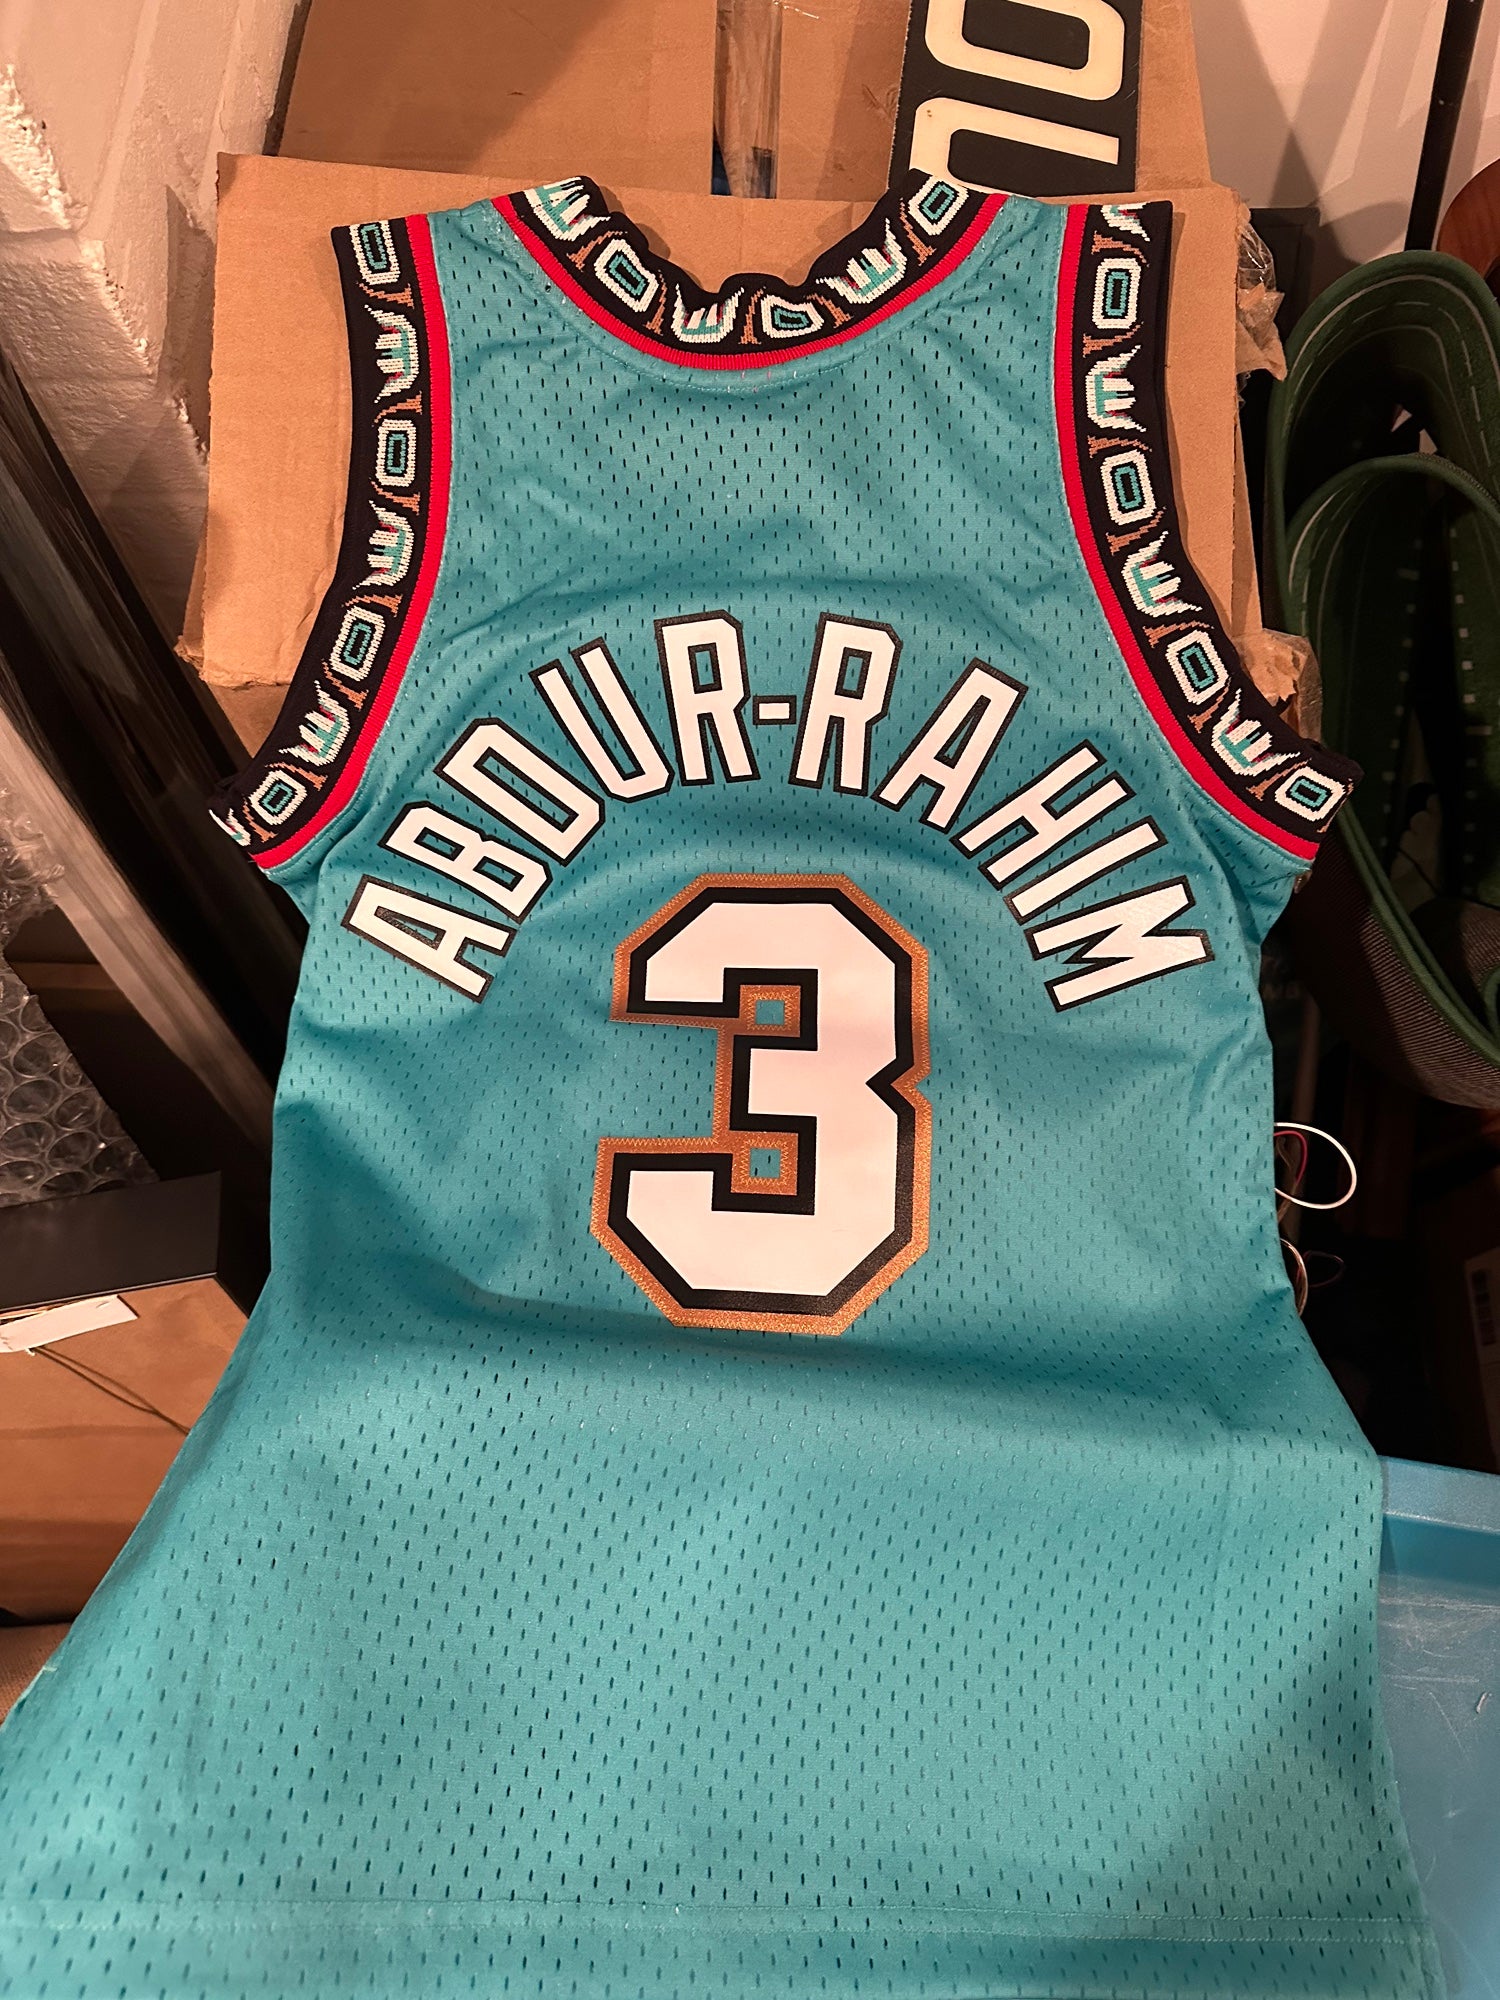 Vancouver Grizzlies Shareef Abdur-Rahim black jersey-NBA NWT by Mitchell &  Ness | SidelineSwap